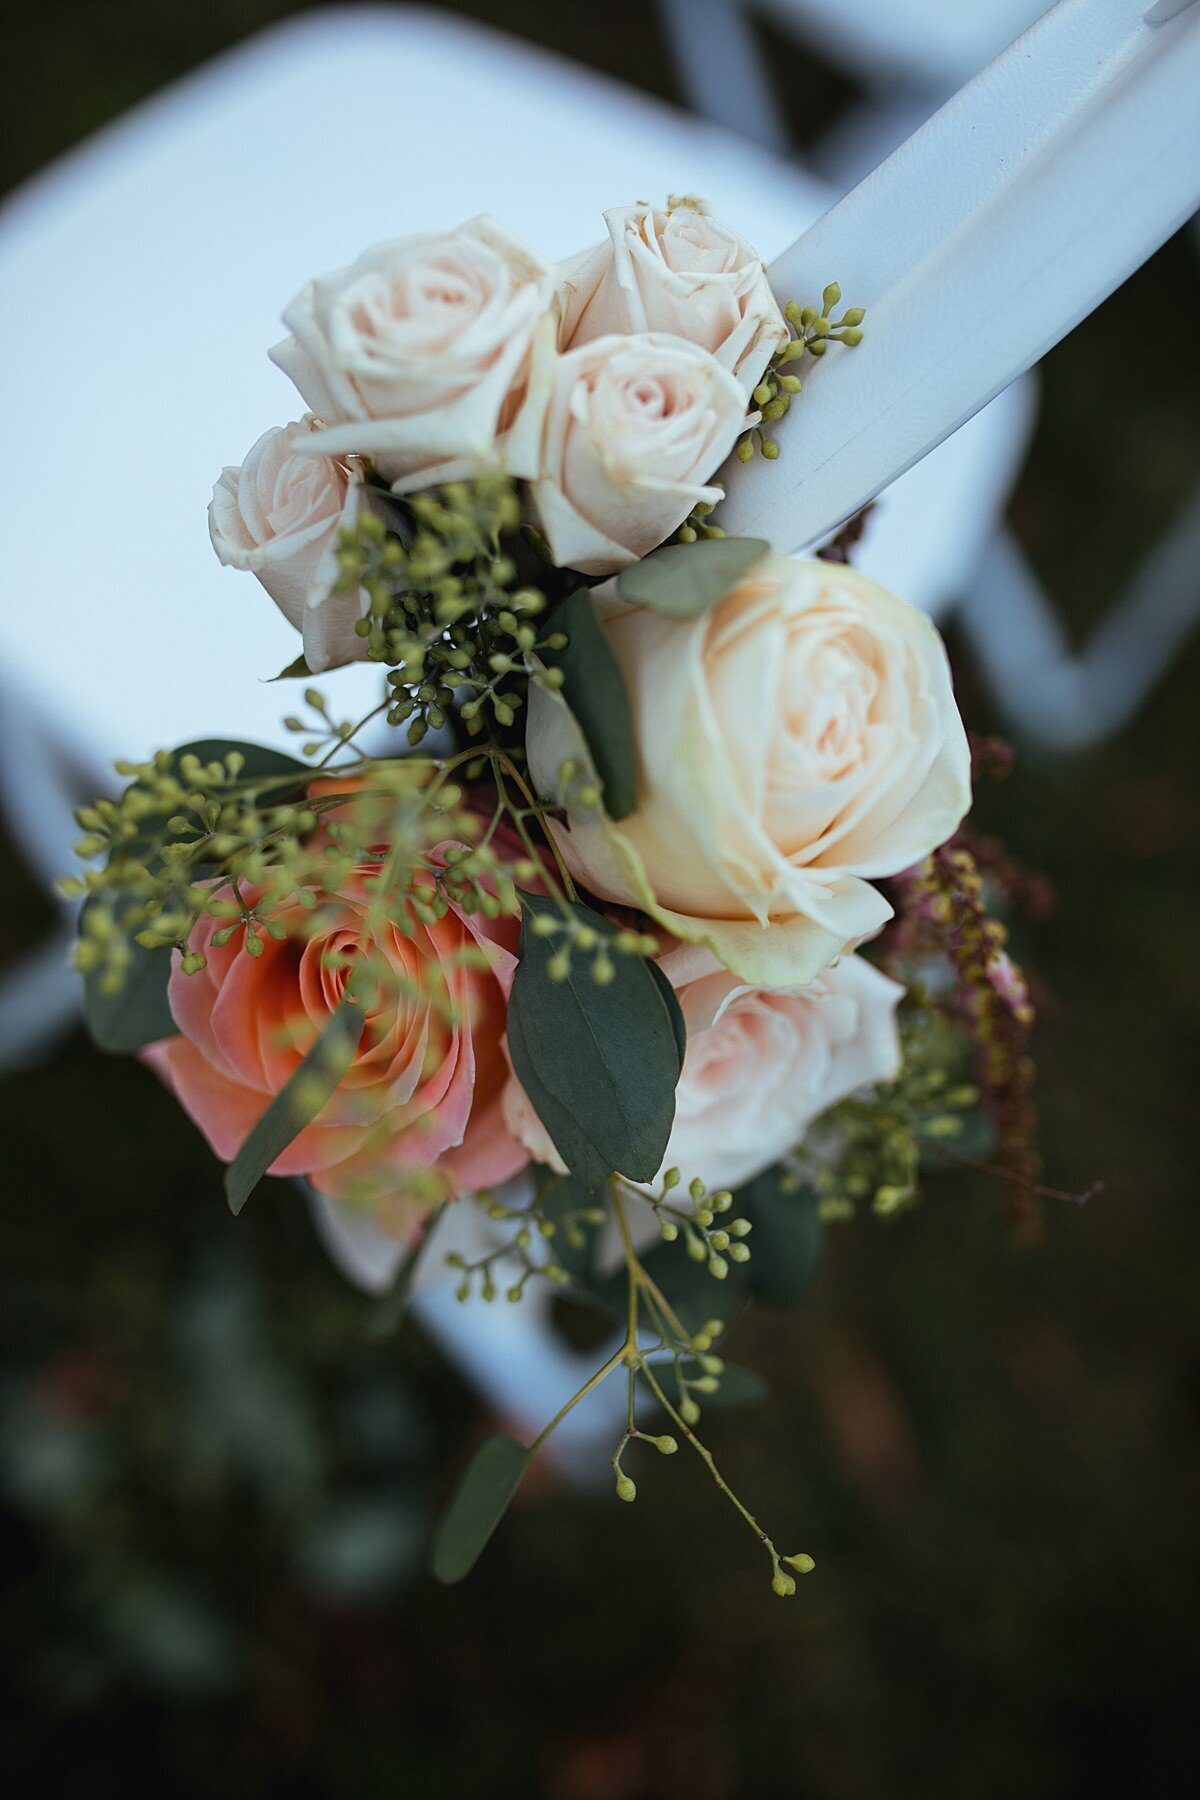 Detail photo of chair marker flowers for a wedding ceremony at Cheekwood. The white garden chair has seeded eucalyptus, peach and ivory roses tied to the side.